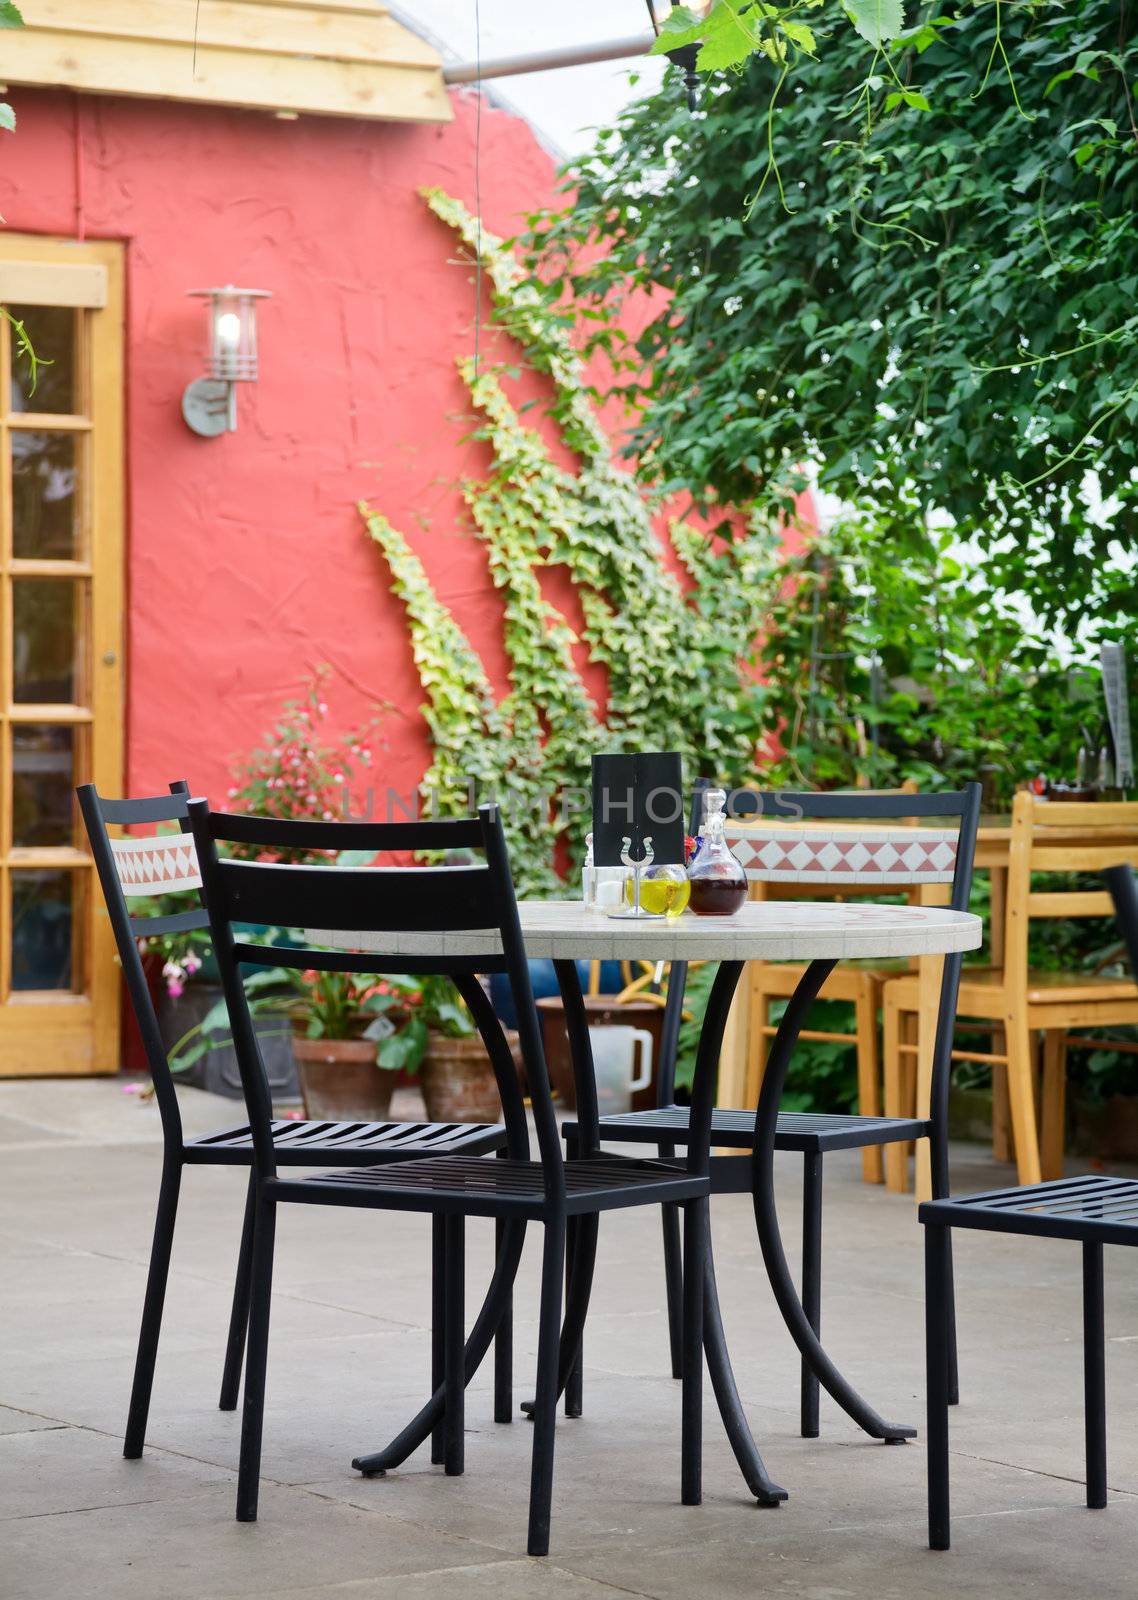 Table with chairs in a cafe terrace